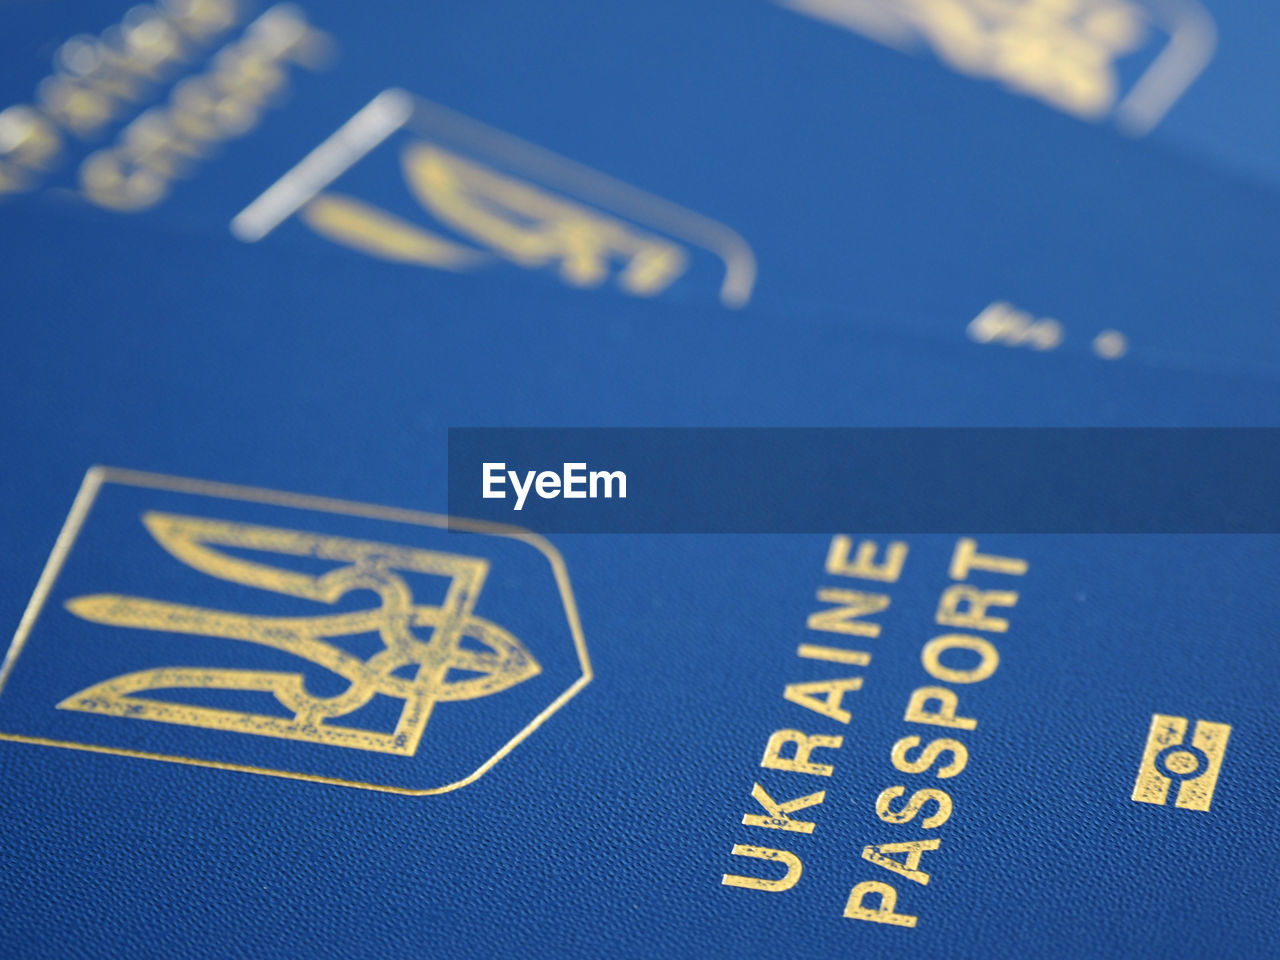 Ukrainian biometric passport id to travel the europe without visas on the table. 